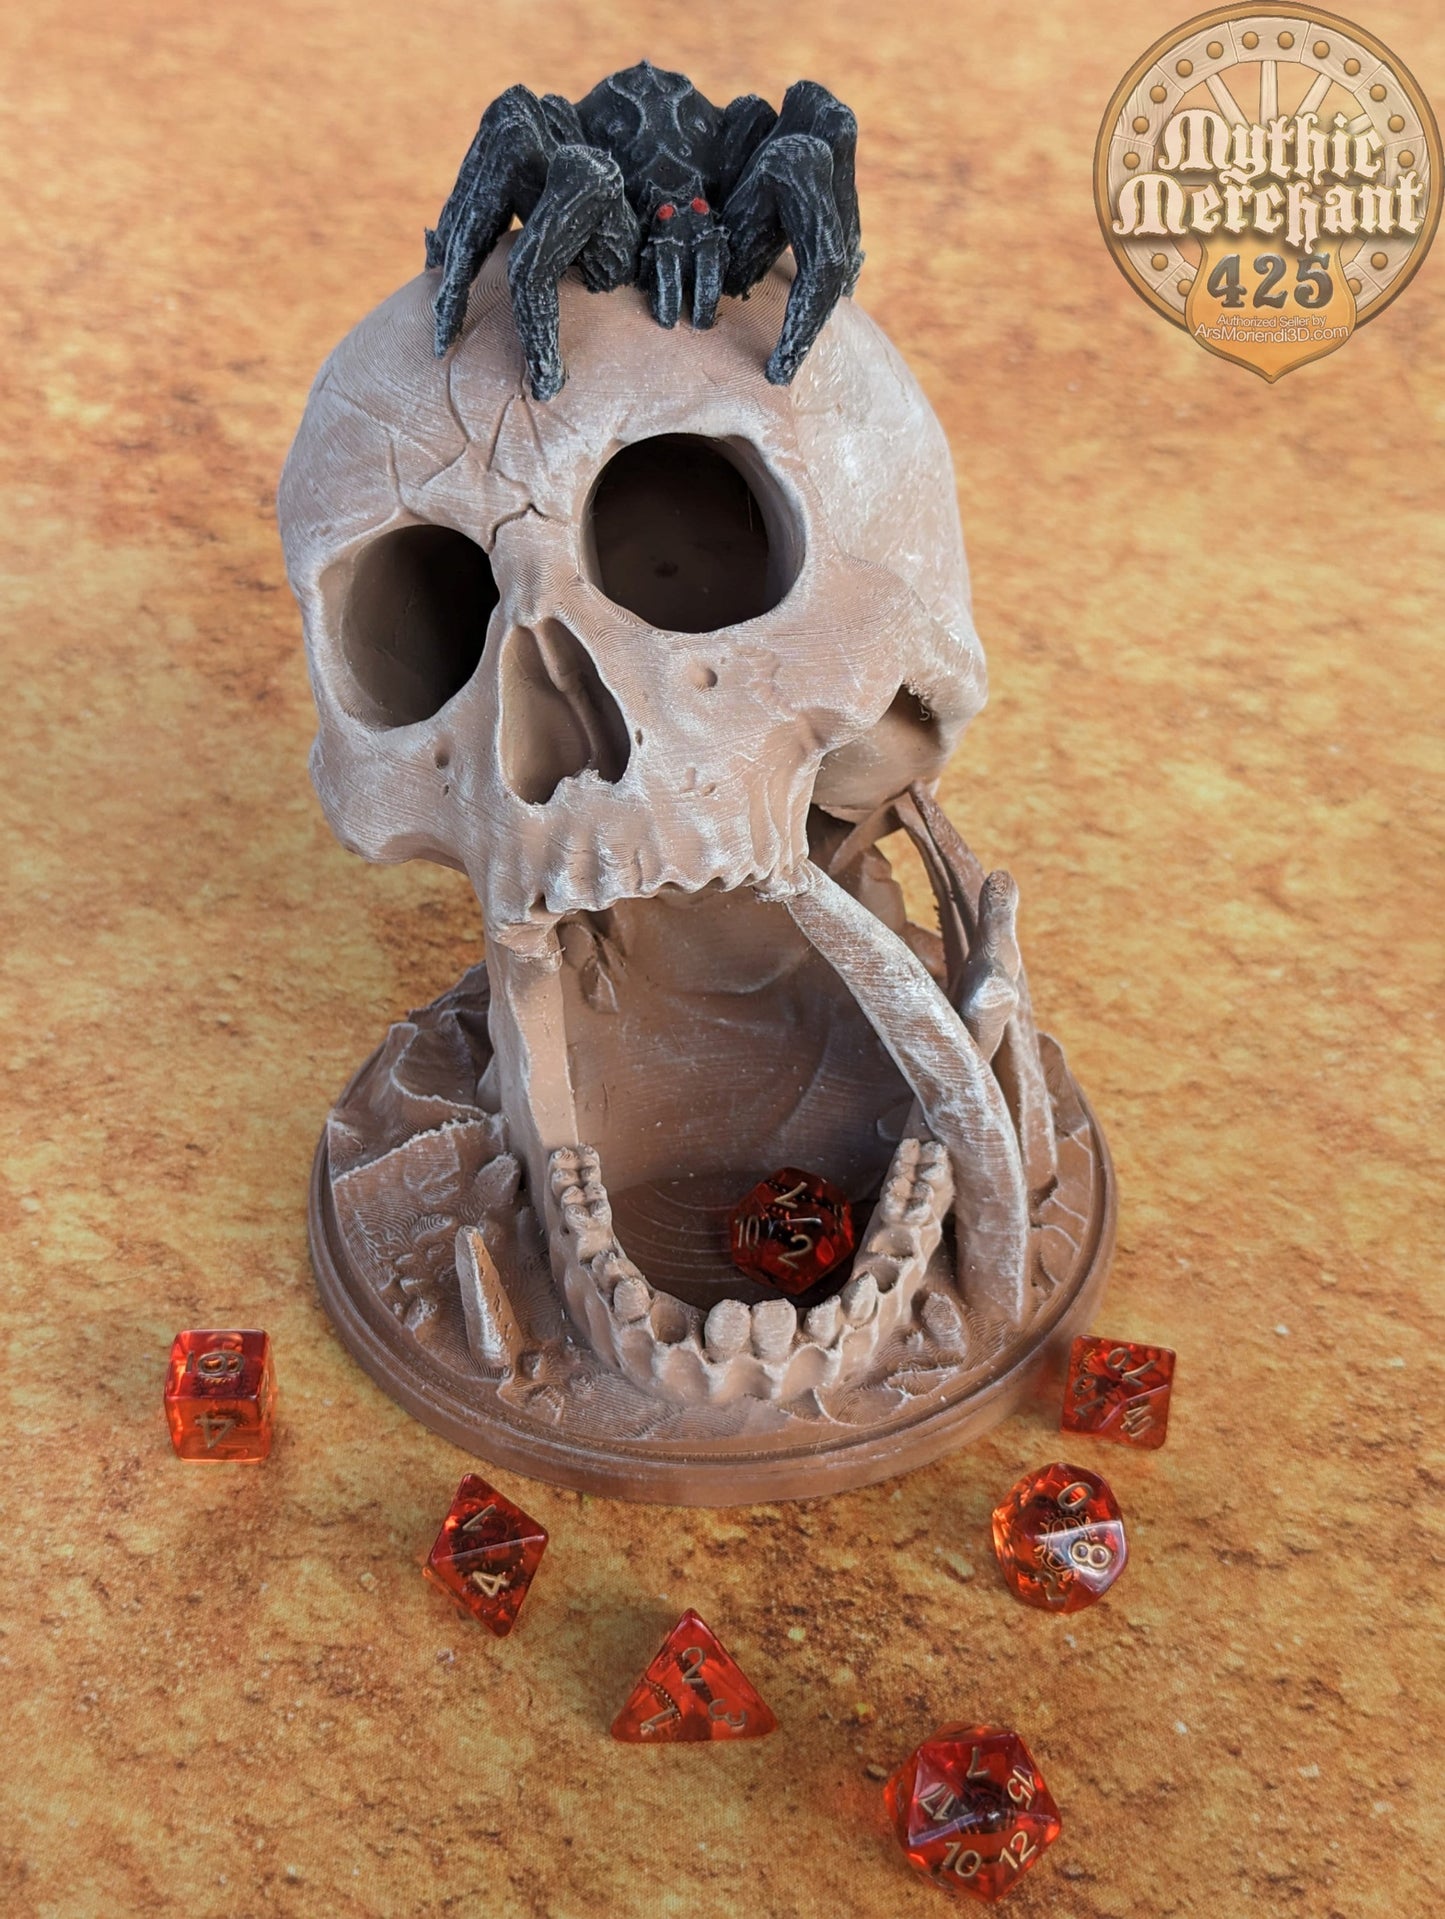 Desert's Kiss Skull 3D Printed Dice Tower - Mythic Mugs by Ars Moriendi 3D | Dice Tray | D20 Dice Vault - Lost to the sands of time.